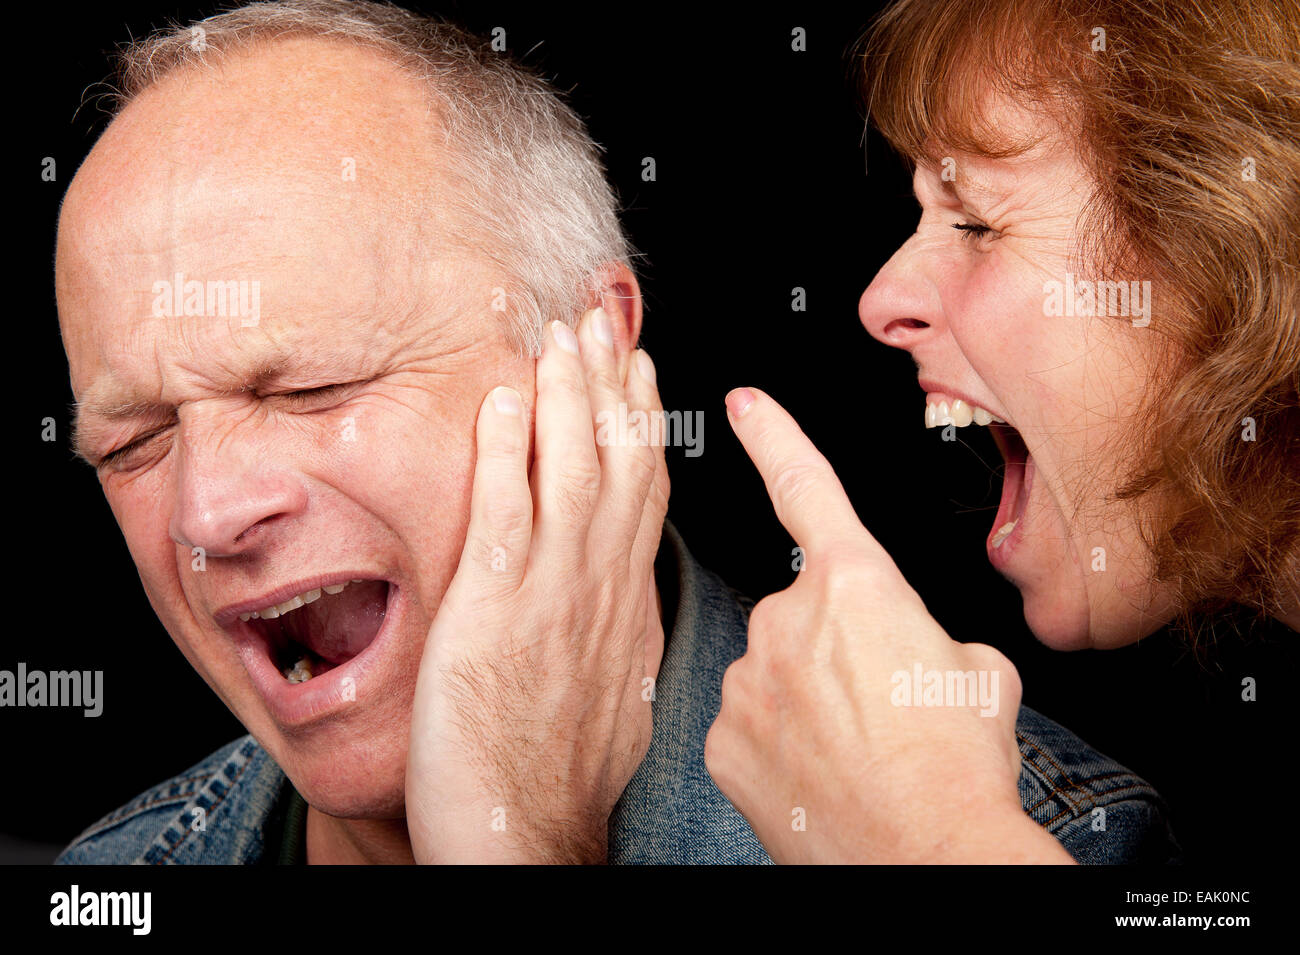 Middle aged couple having an argument, with the woman shouting and pointing finger at the crying man. Stock Photo